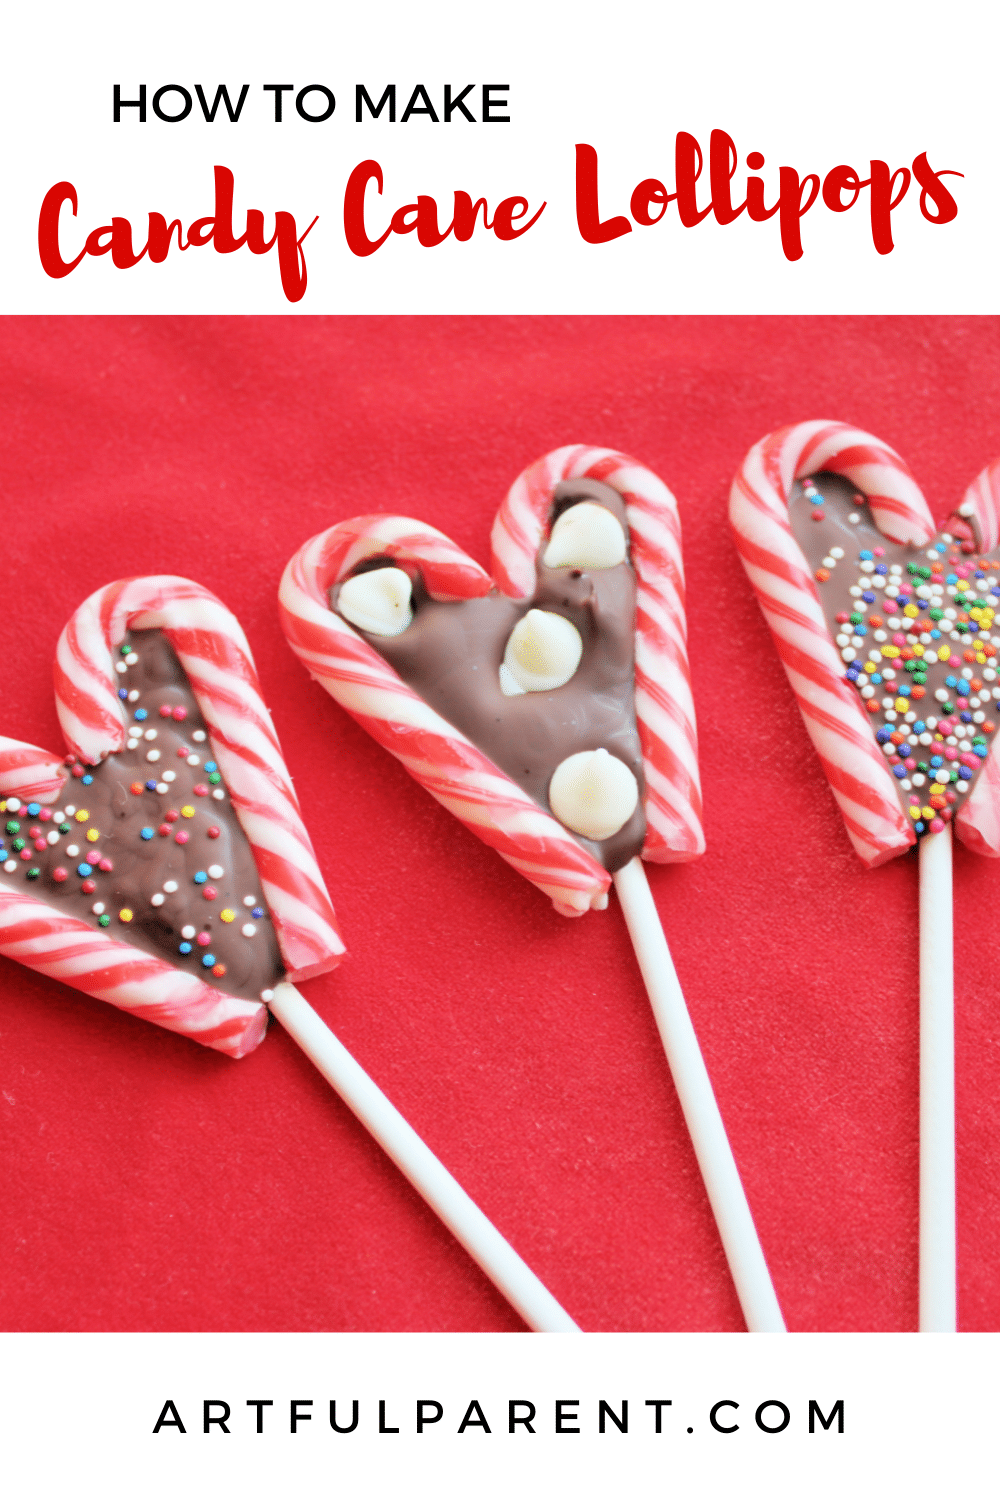 How To Make Candy Cane Lollipops